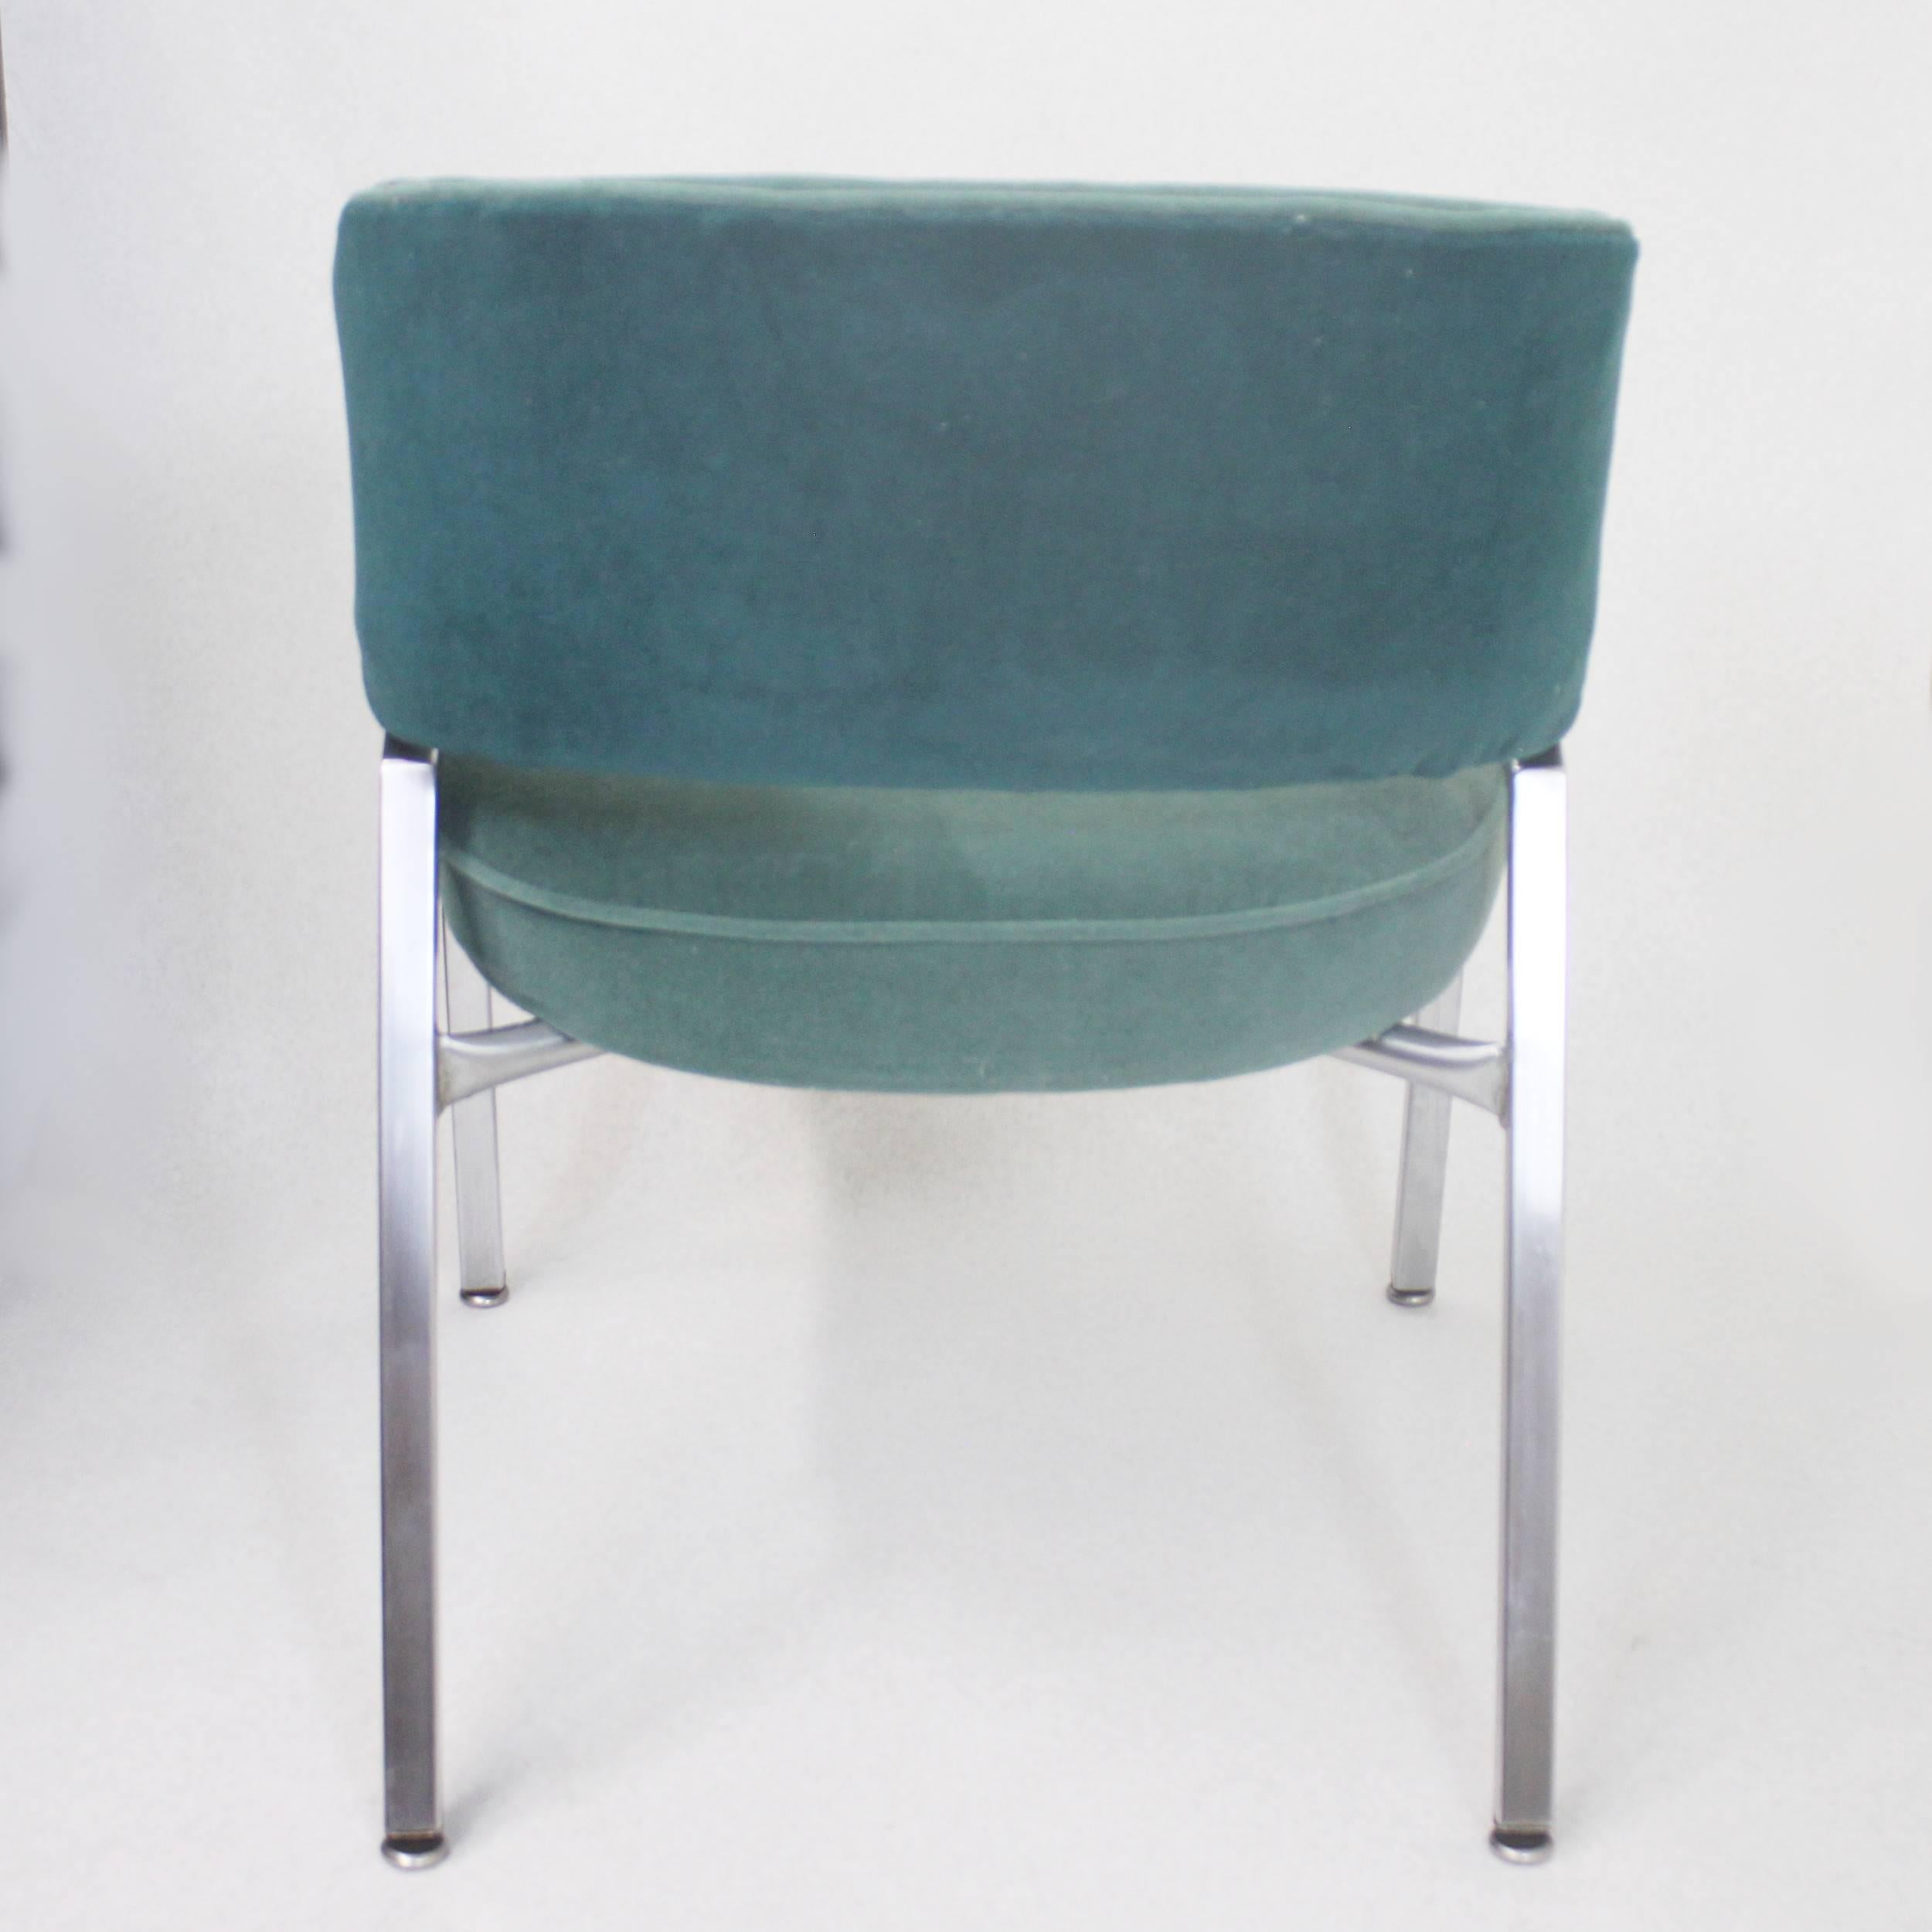 Rare Pair of 1970s Mid-Century Modern Teal Green and Chrome Side Armchairs 5